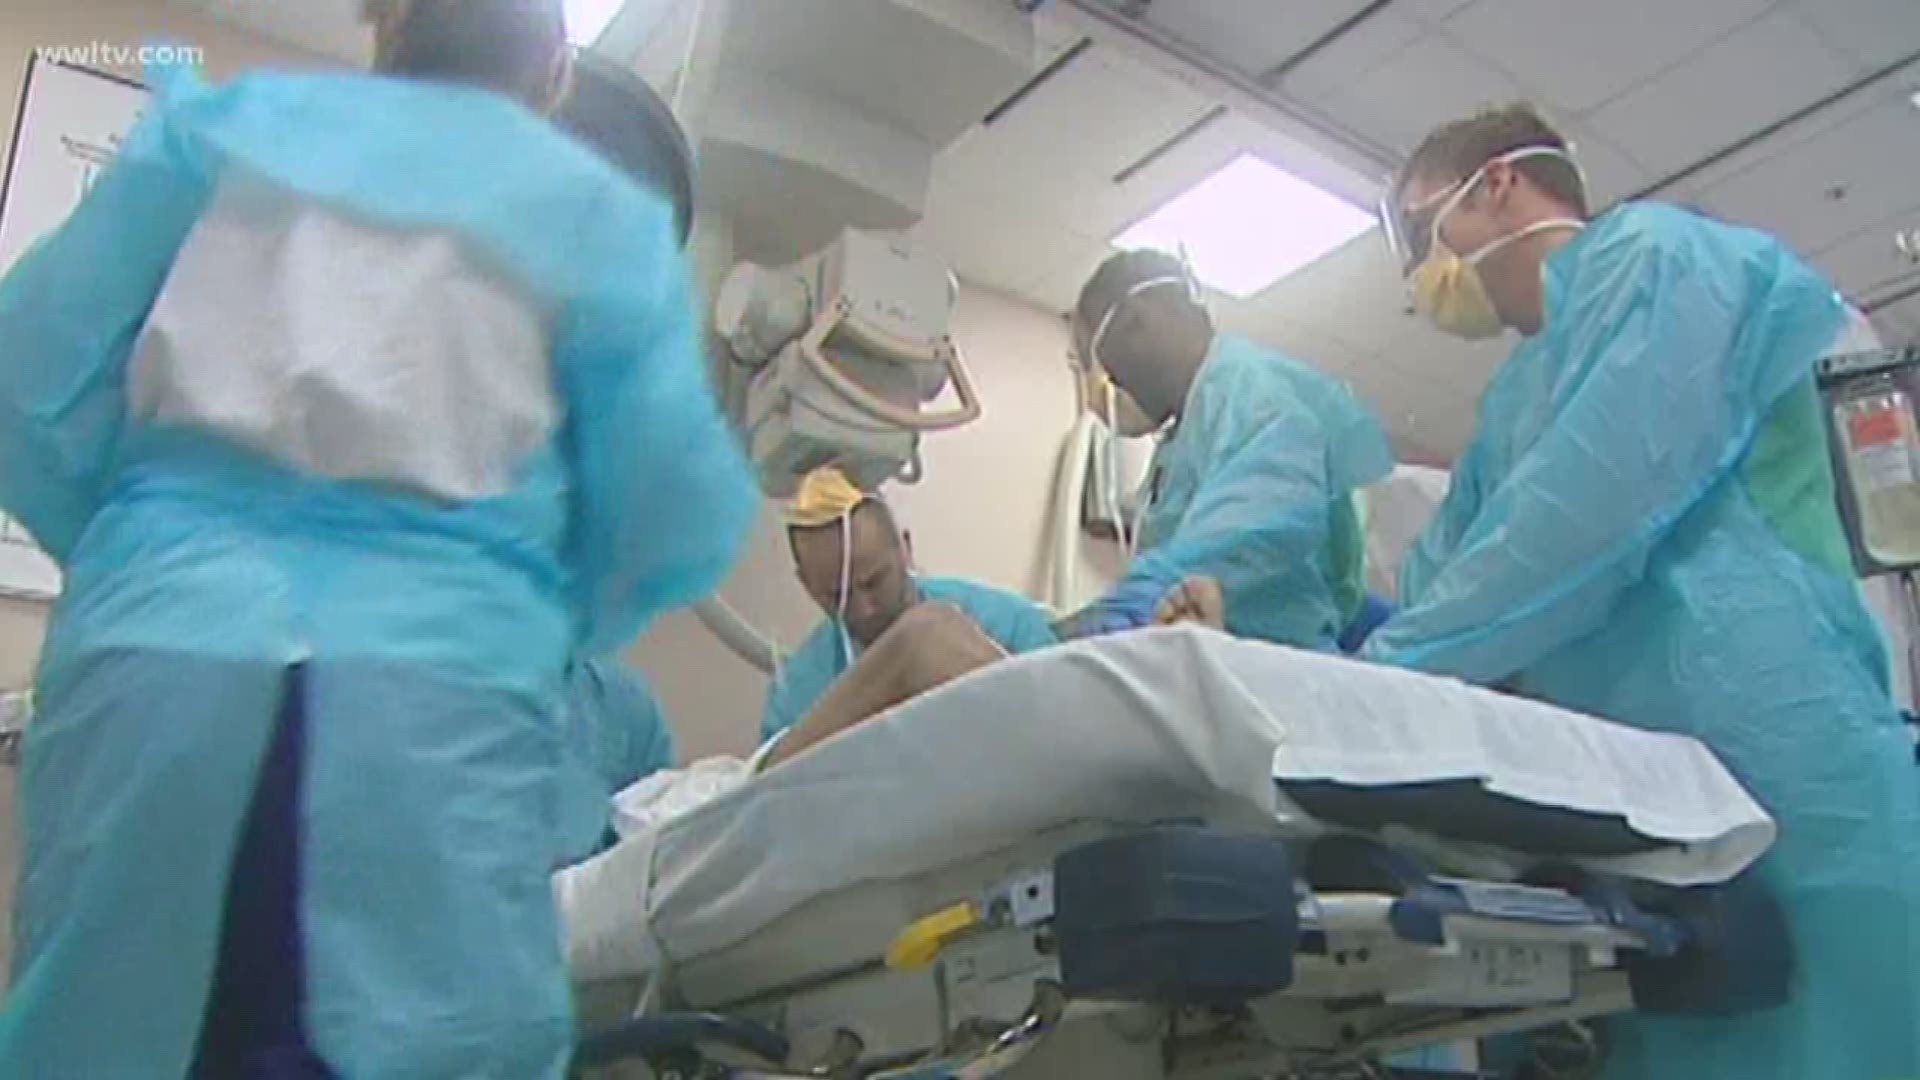 The team that tended to hundreds of gunshot wound patients in Las Vegas is training doctors in New Orleans.